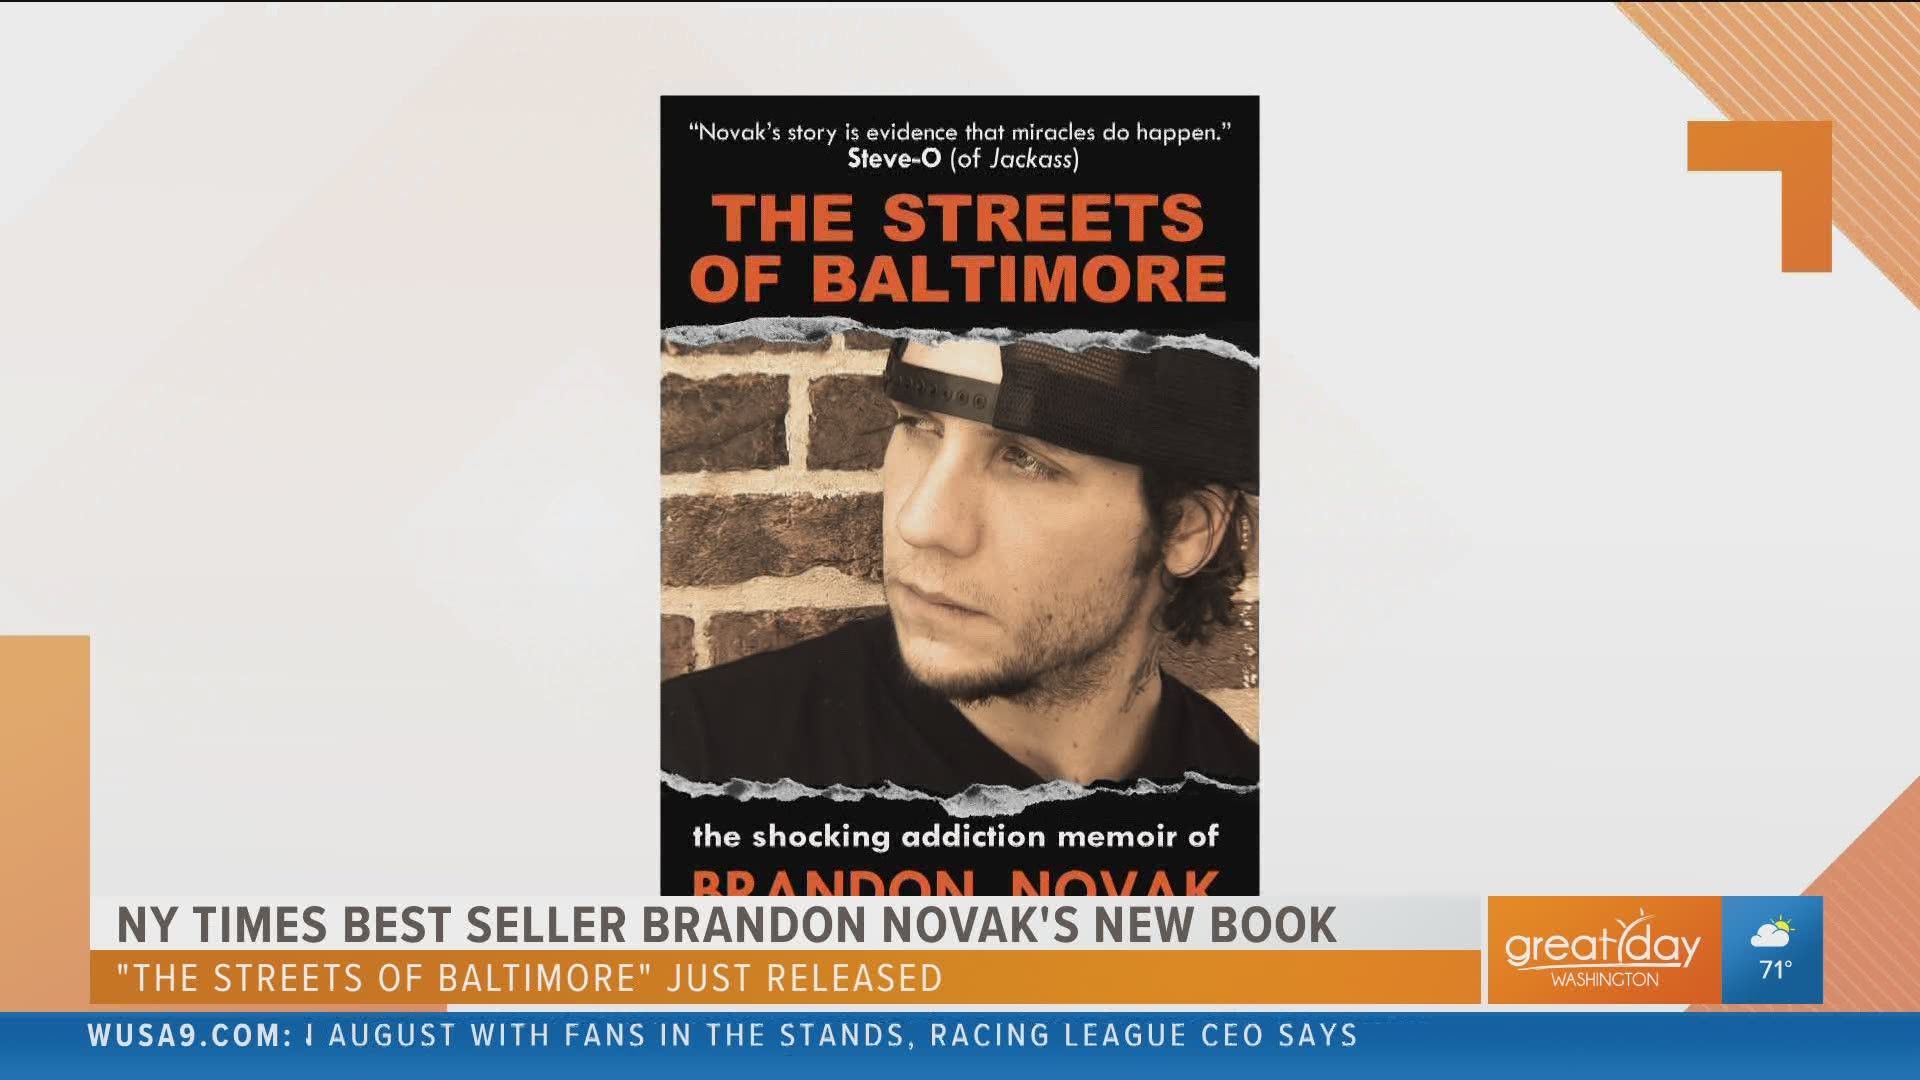 MTV star, author and Maryland native Brandon Novak shares his struggles with addiction and why these times can be tough for those who are combating addiction.